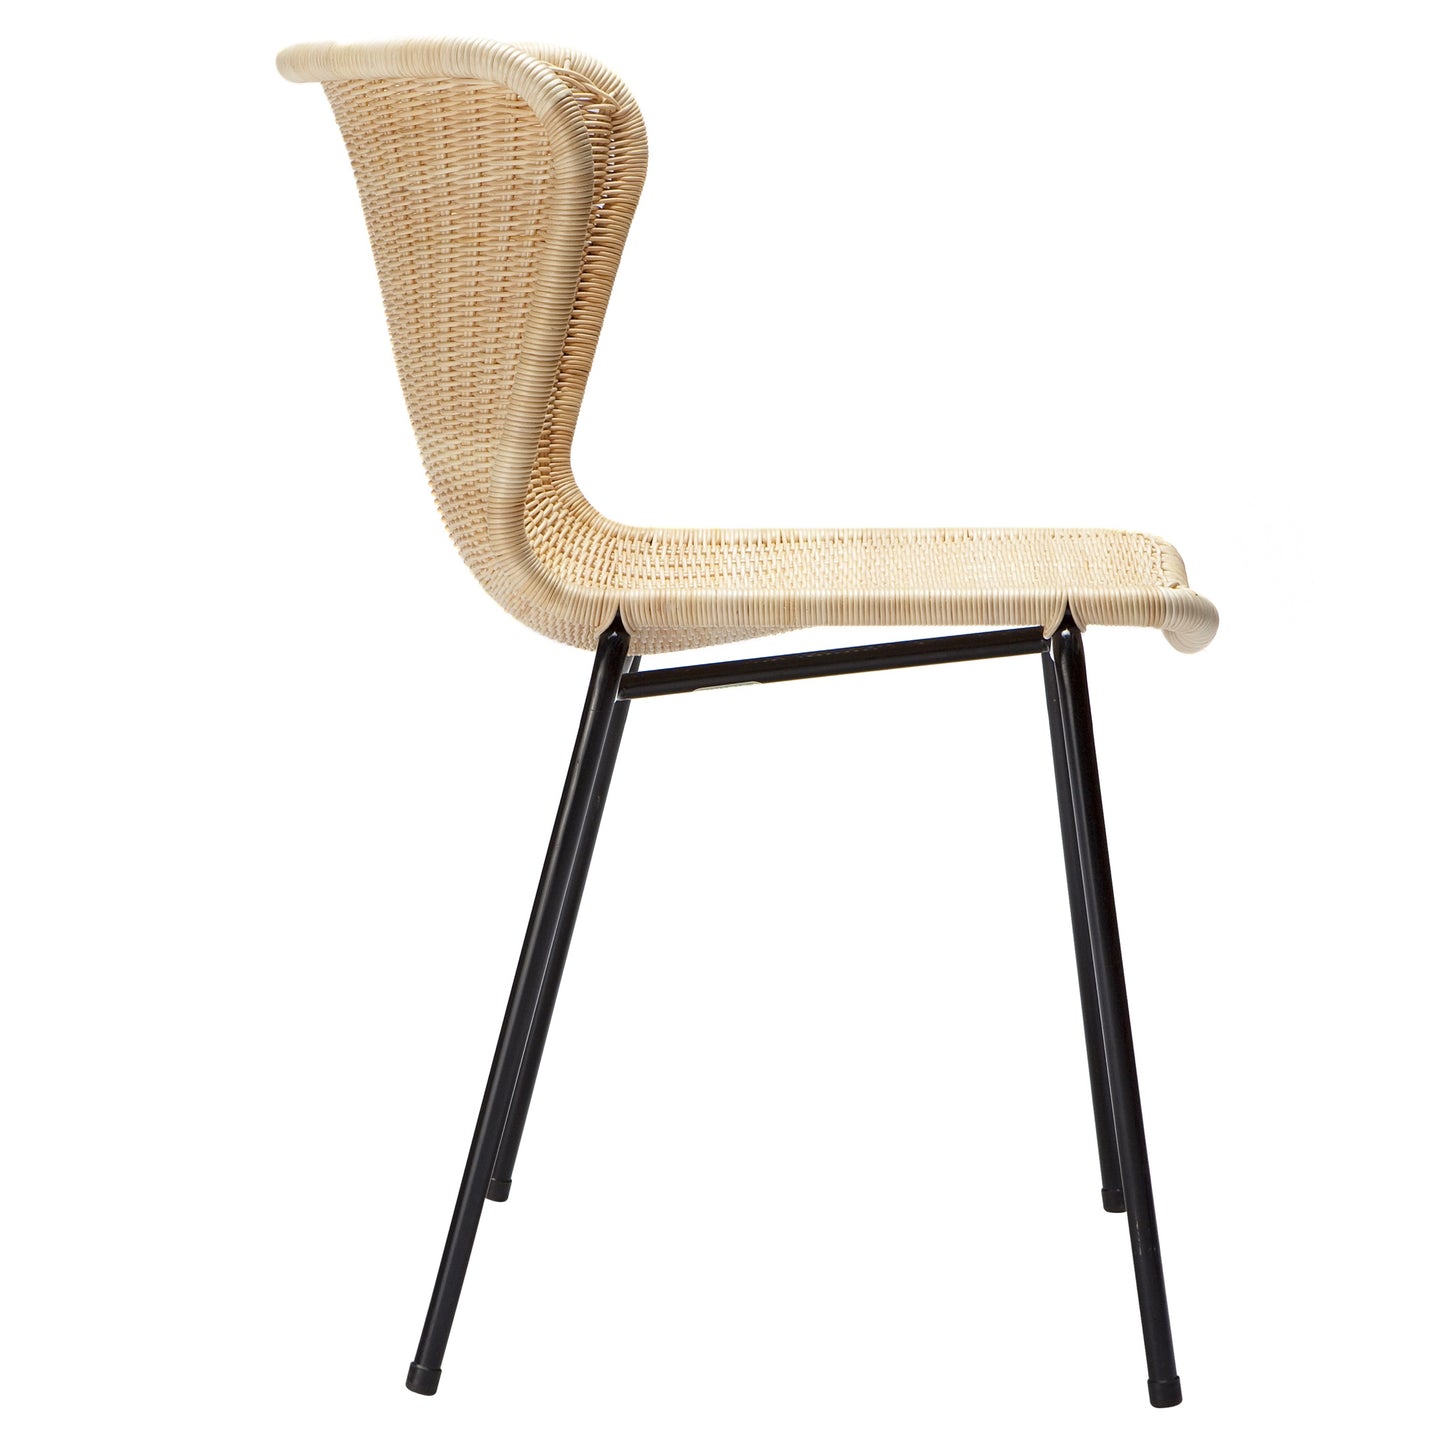 Rattan "Wing" Outdoor Dining Chair